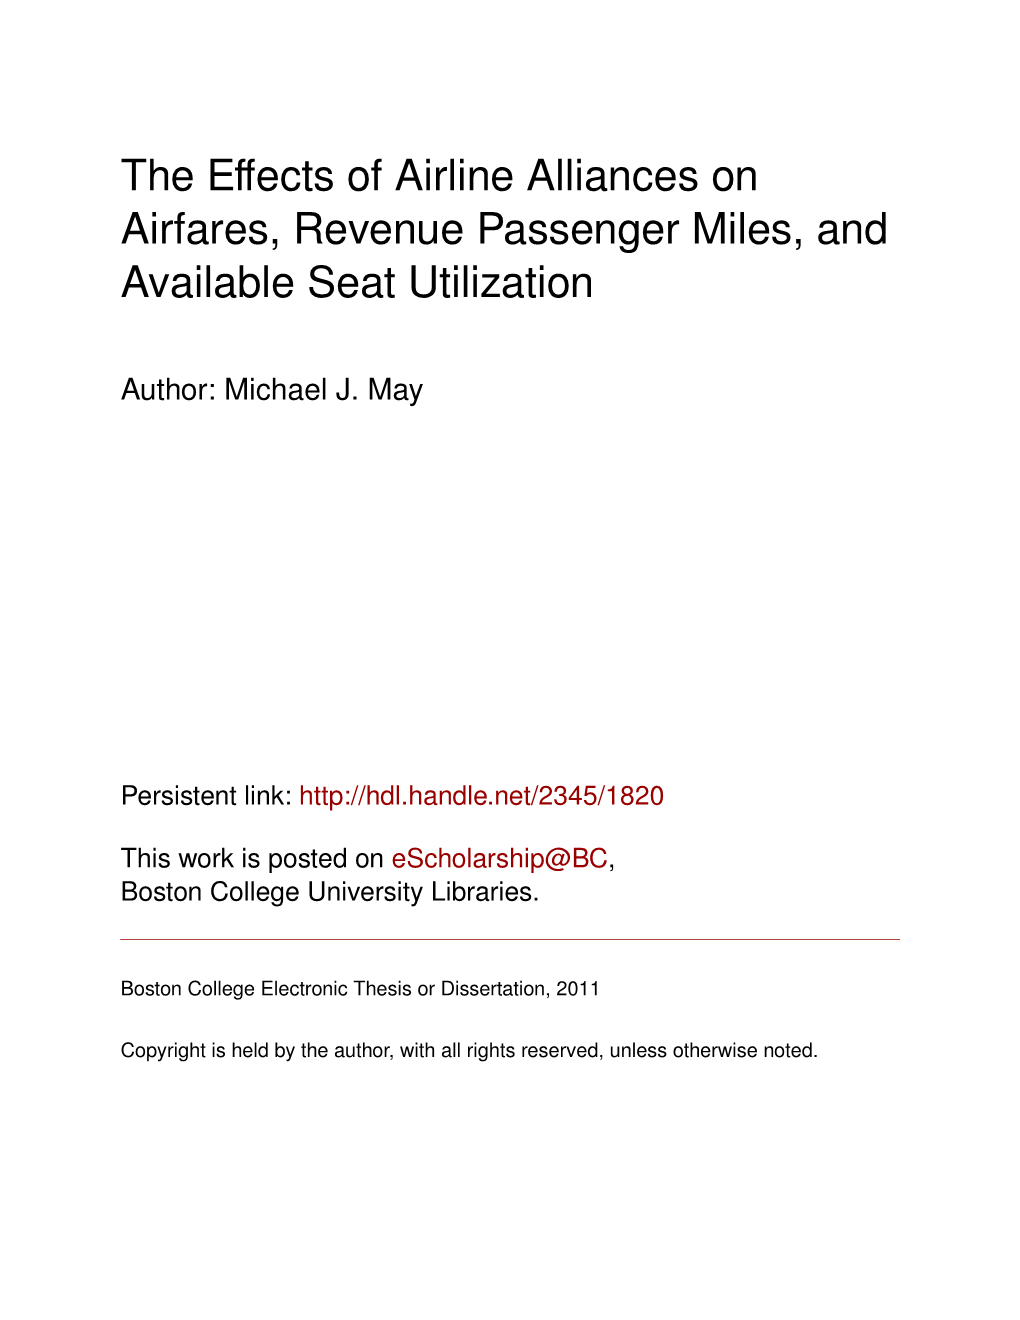 The Effects of Airline Alliances on Airfares, Revenue Passenger Miles, and Available Seat Utilization